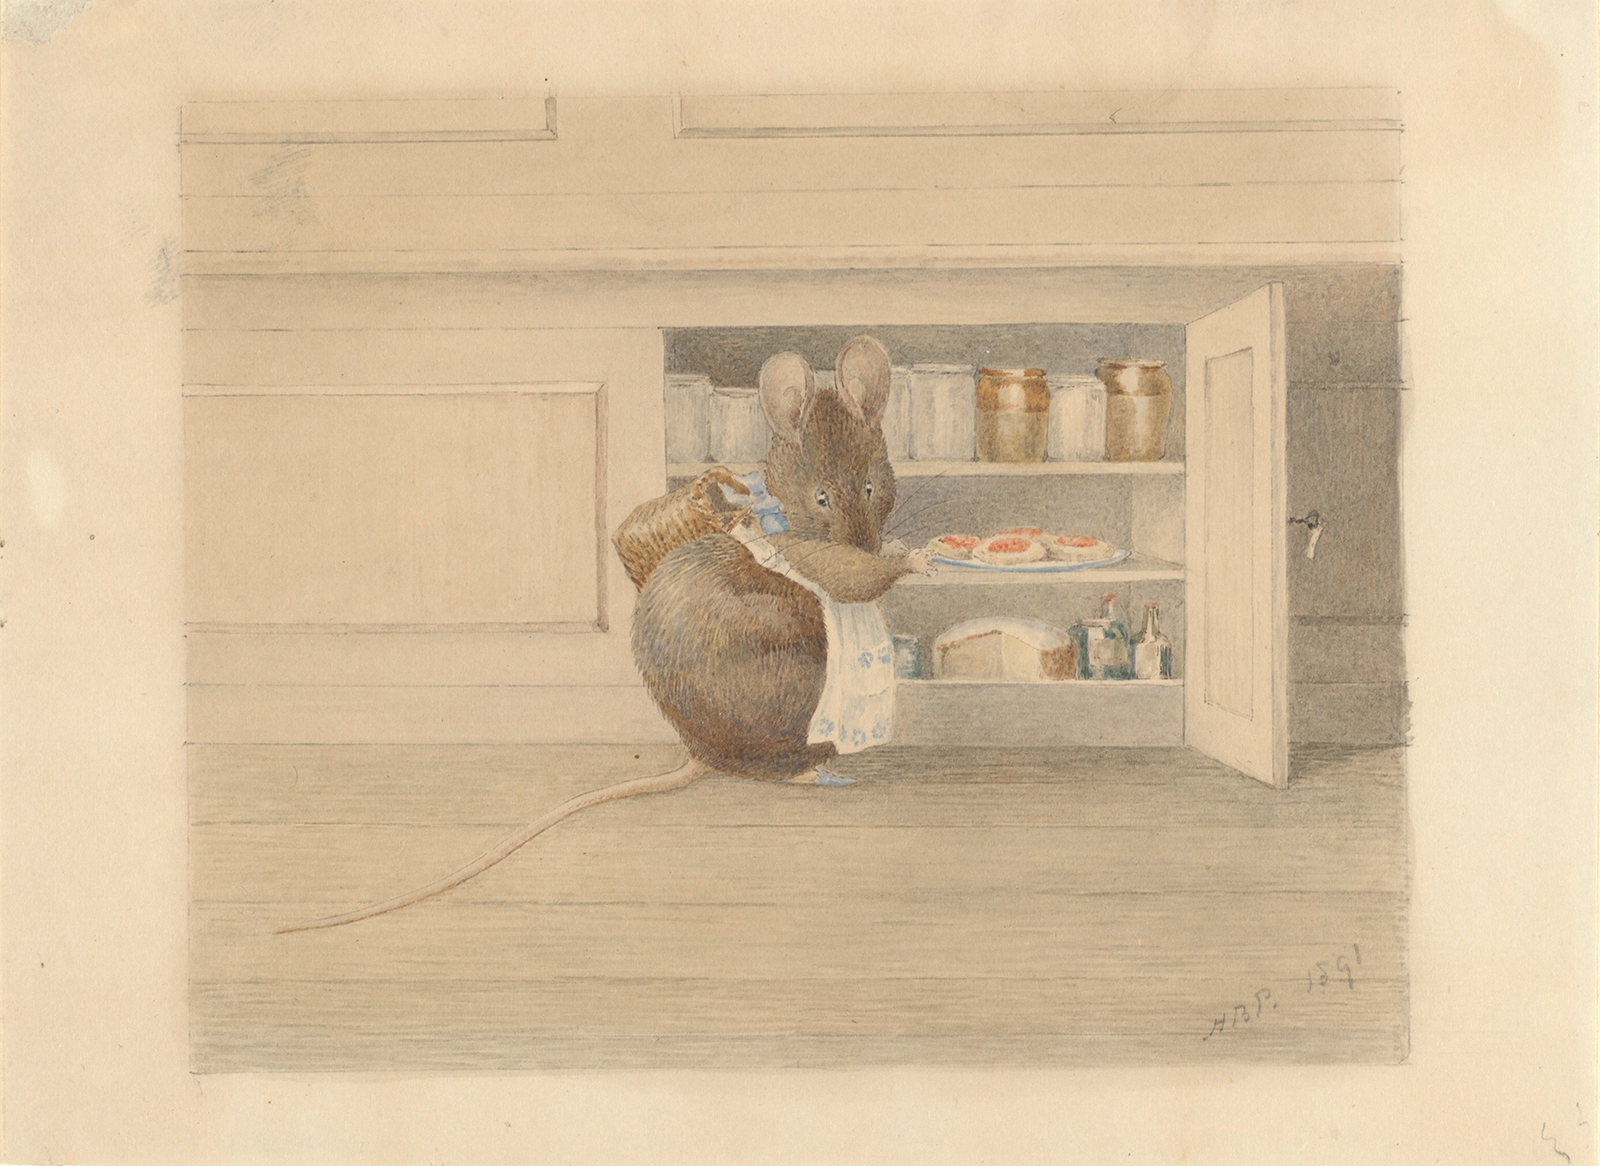 Beatrix Potter art - "Apple Dapply at a cupboard and running with a plate of tarts"